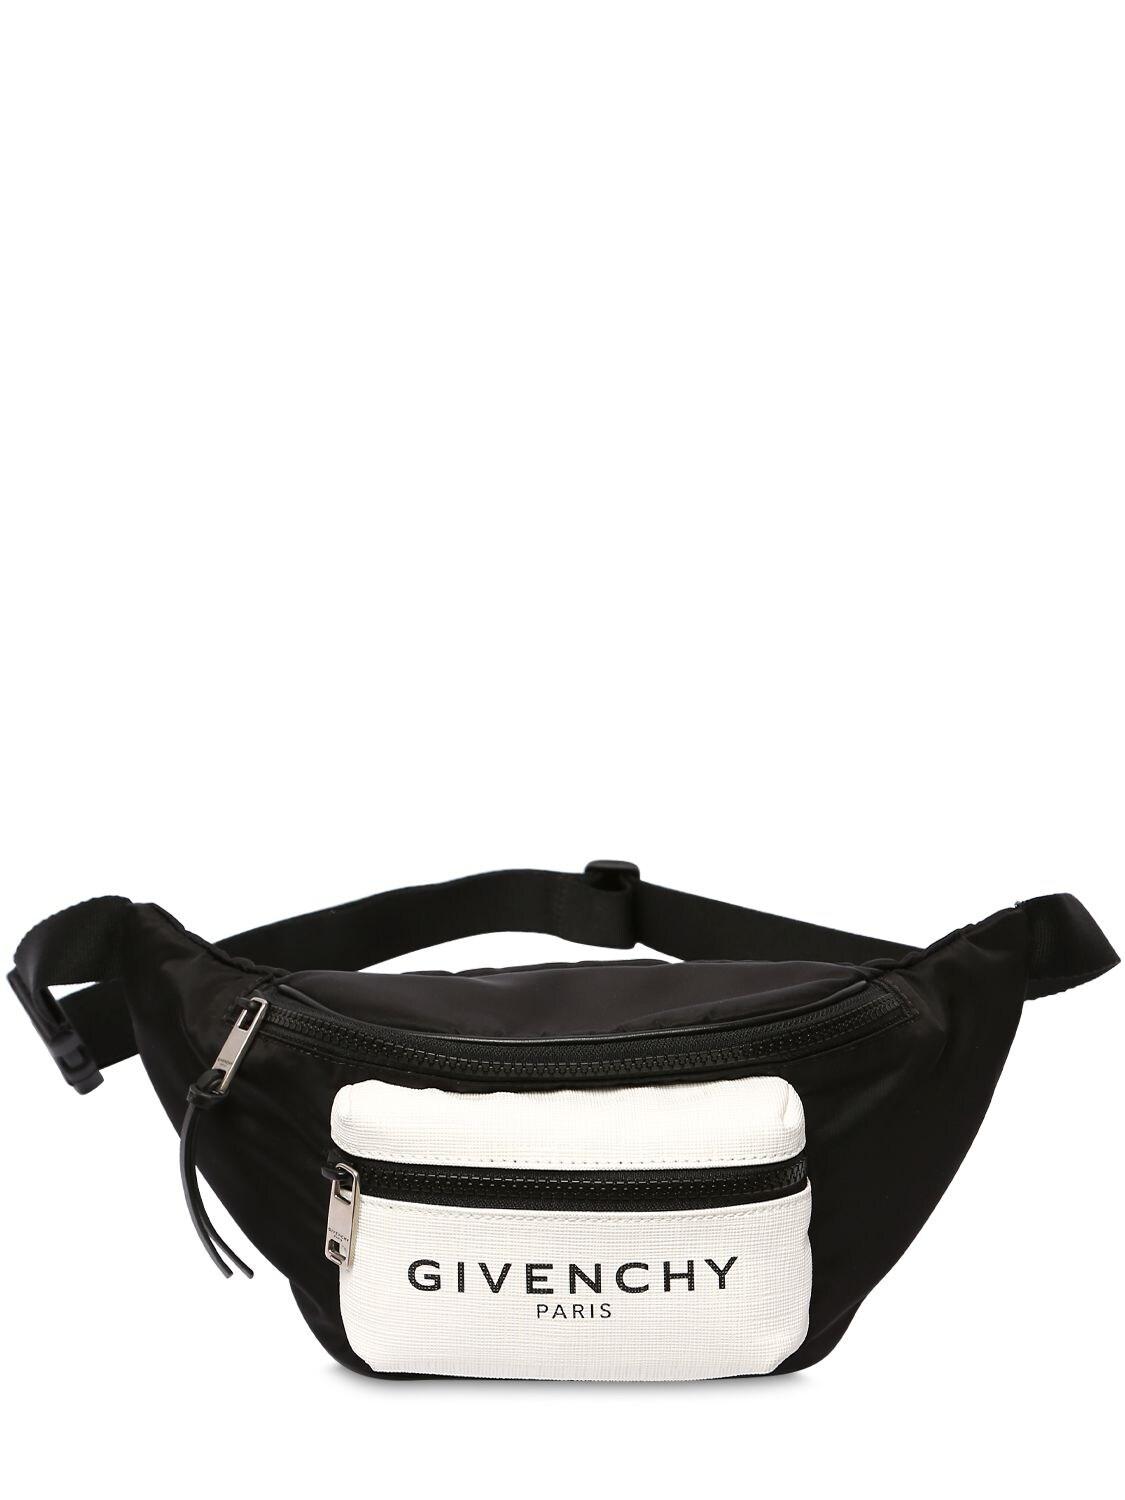 Givenchy Synthetic Glow-in-the-dark Nylon Belt Bag in Black for Men - Lyst